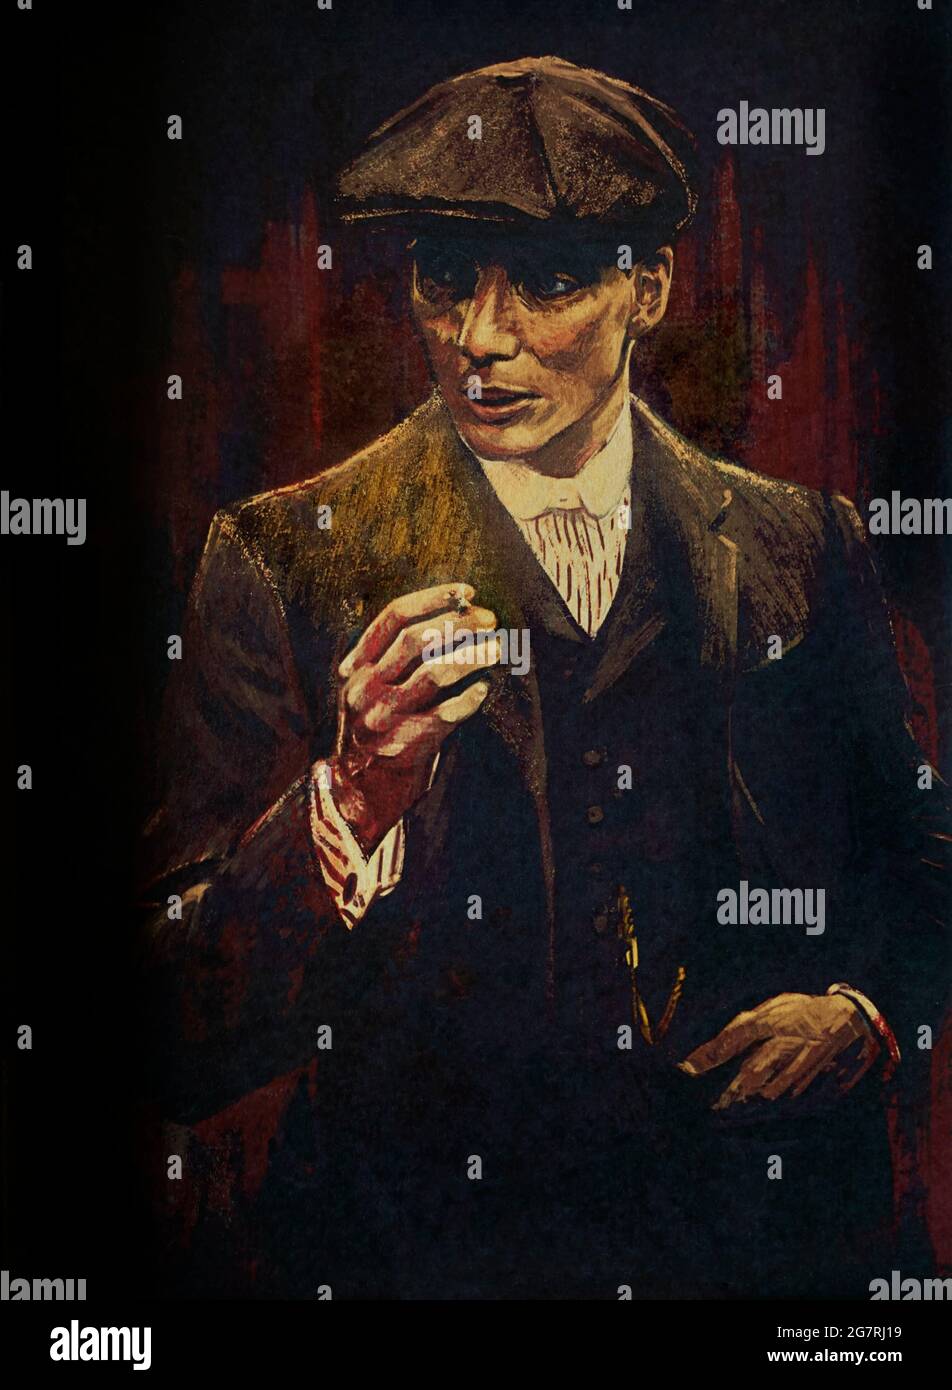 Peaky Blinders art, Tommy Shelby portrait Stock Photo